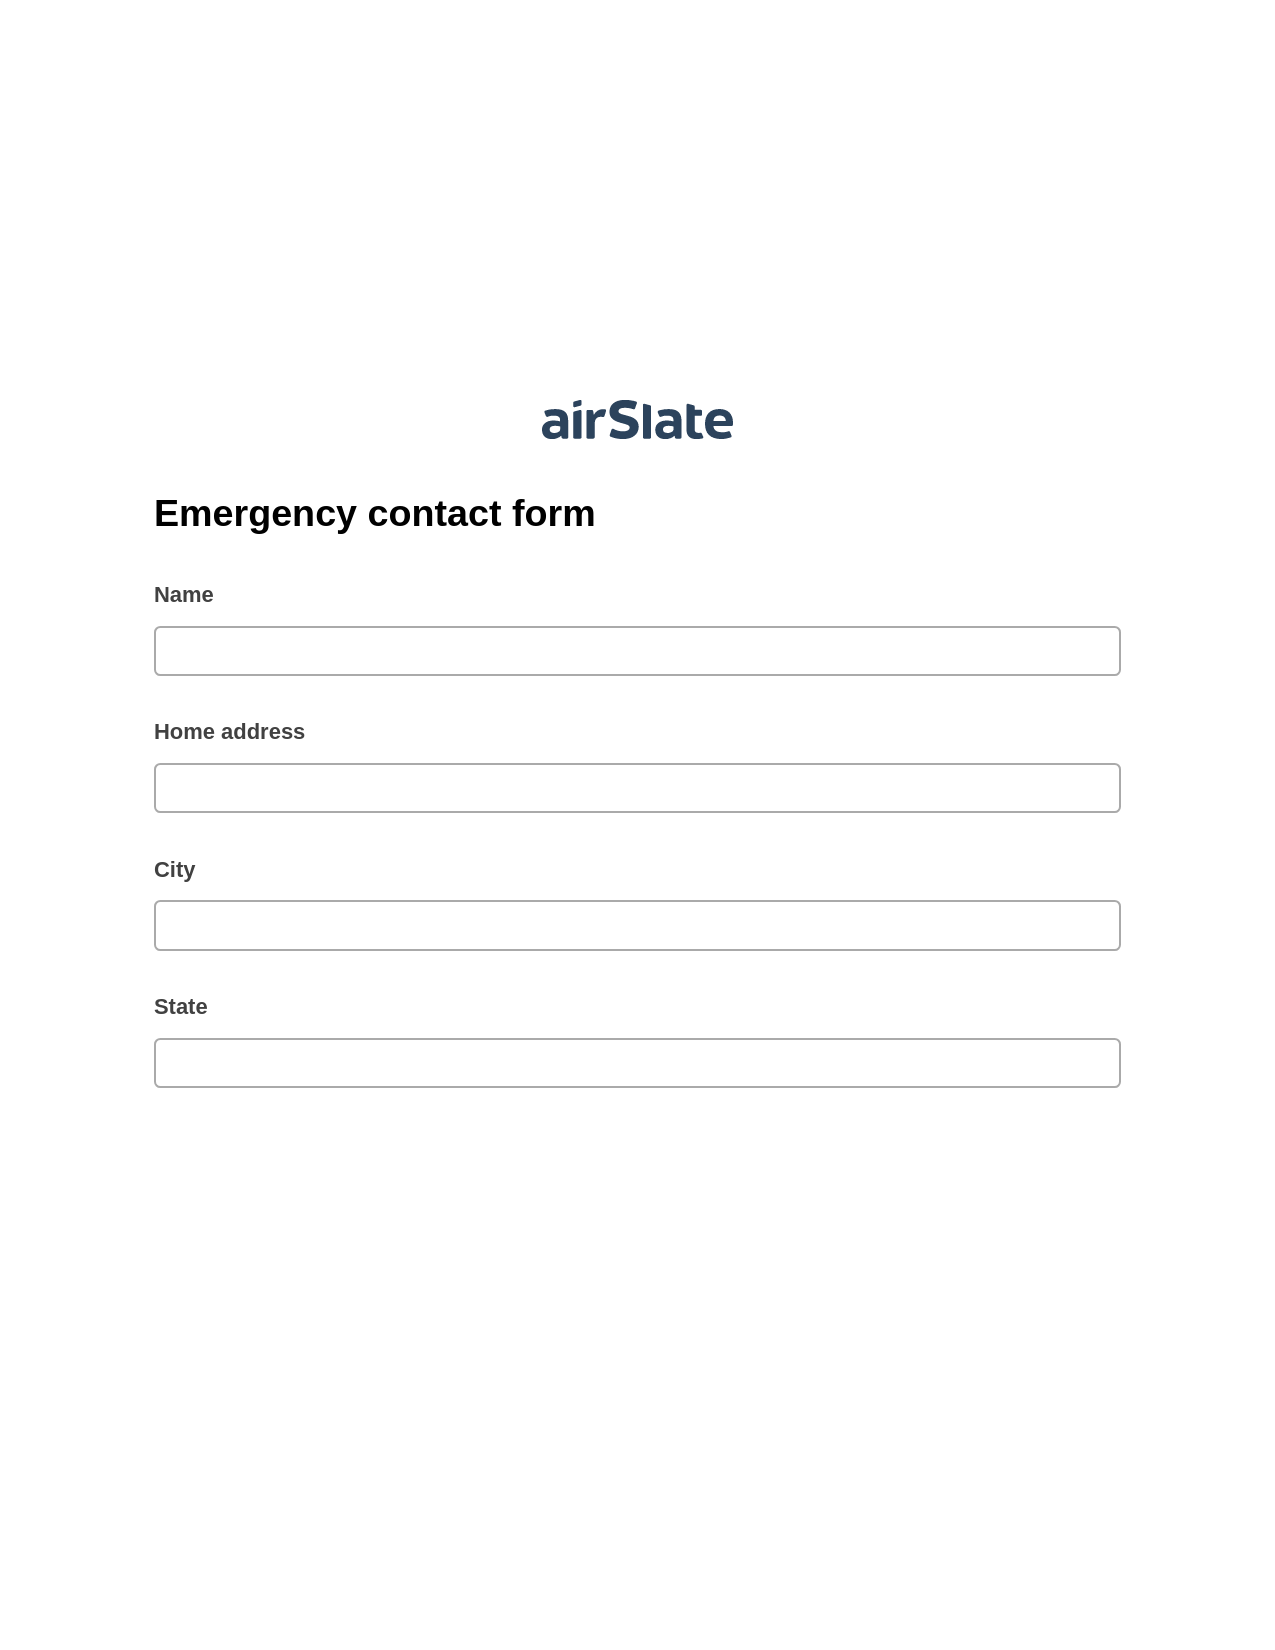 Emergency contact form Pre-fill Slate from MS Dynamics 365 Records Bot, Mailchimp add recipient to audience Bot, Export to Excel 365 Bot